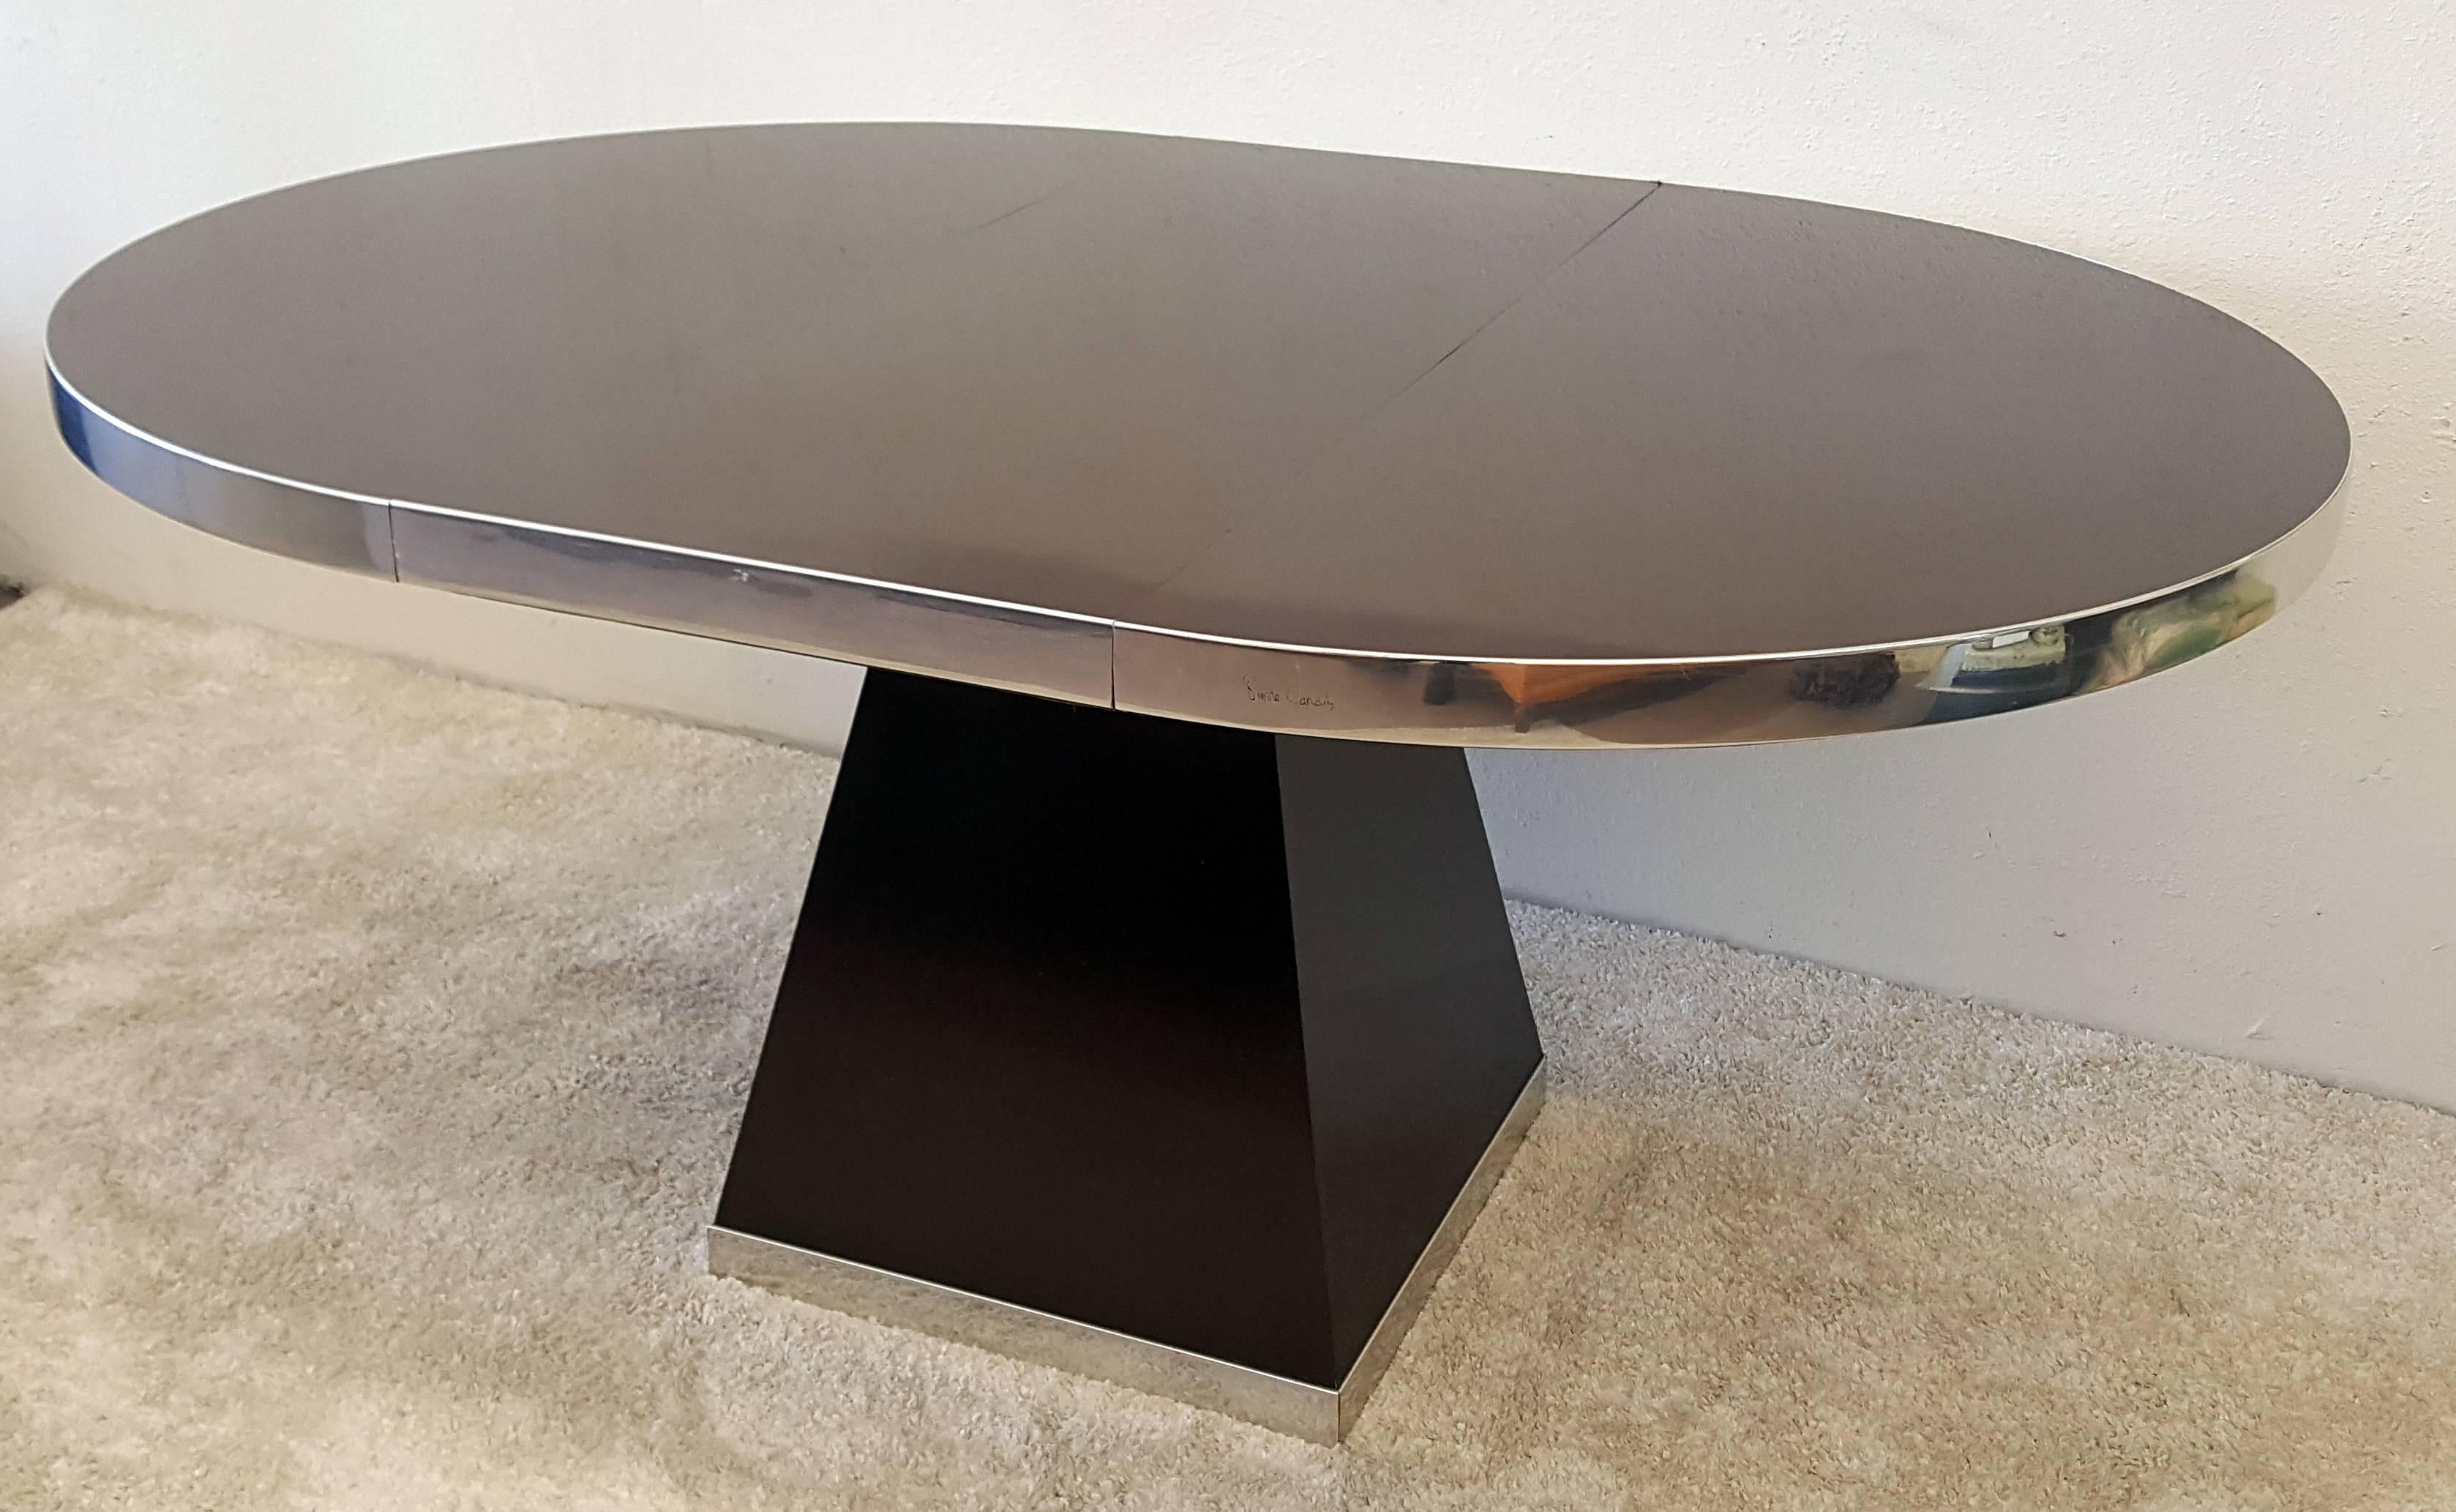 A chocolate colored laminate and polished chrome dining table by Pierre Cardin. This table measures: 45.5 in Diameter without leaf.